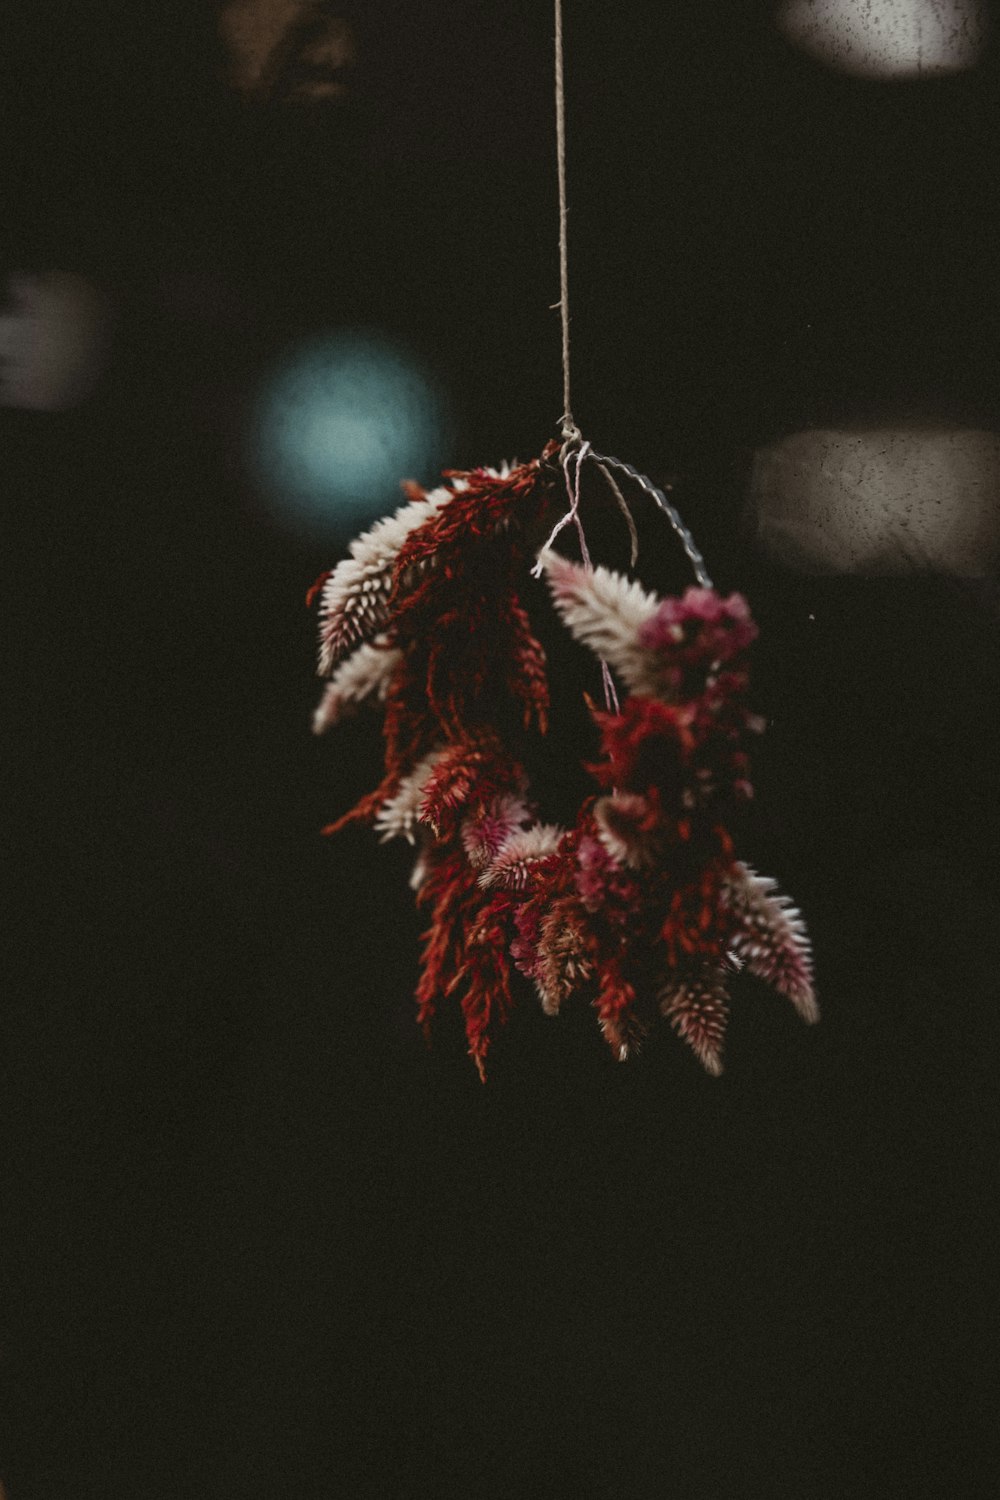 a red and white flower hanging from a string